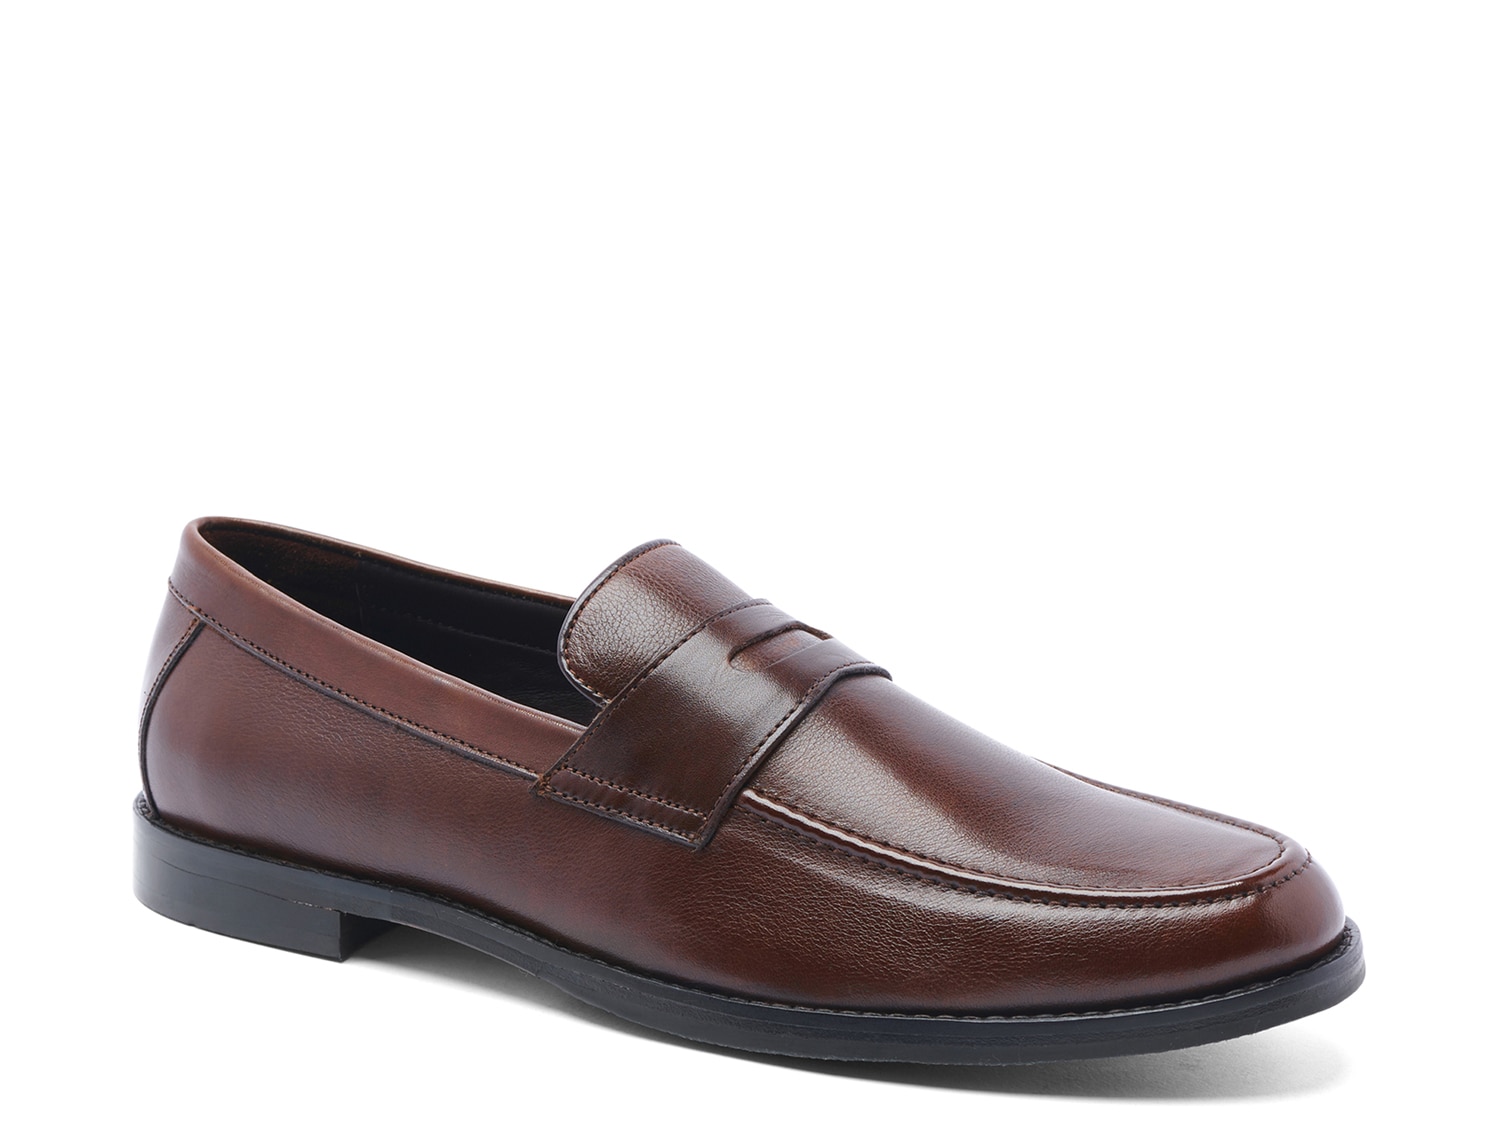 Anthony Veer Sherman Penny Loafer - Free Shipping | DSW